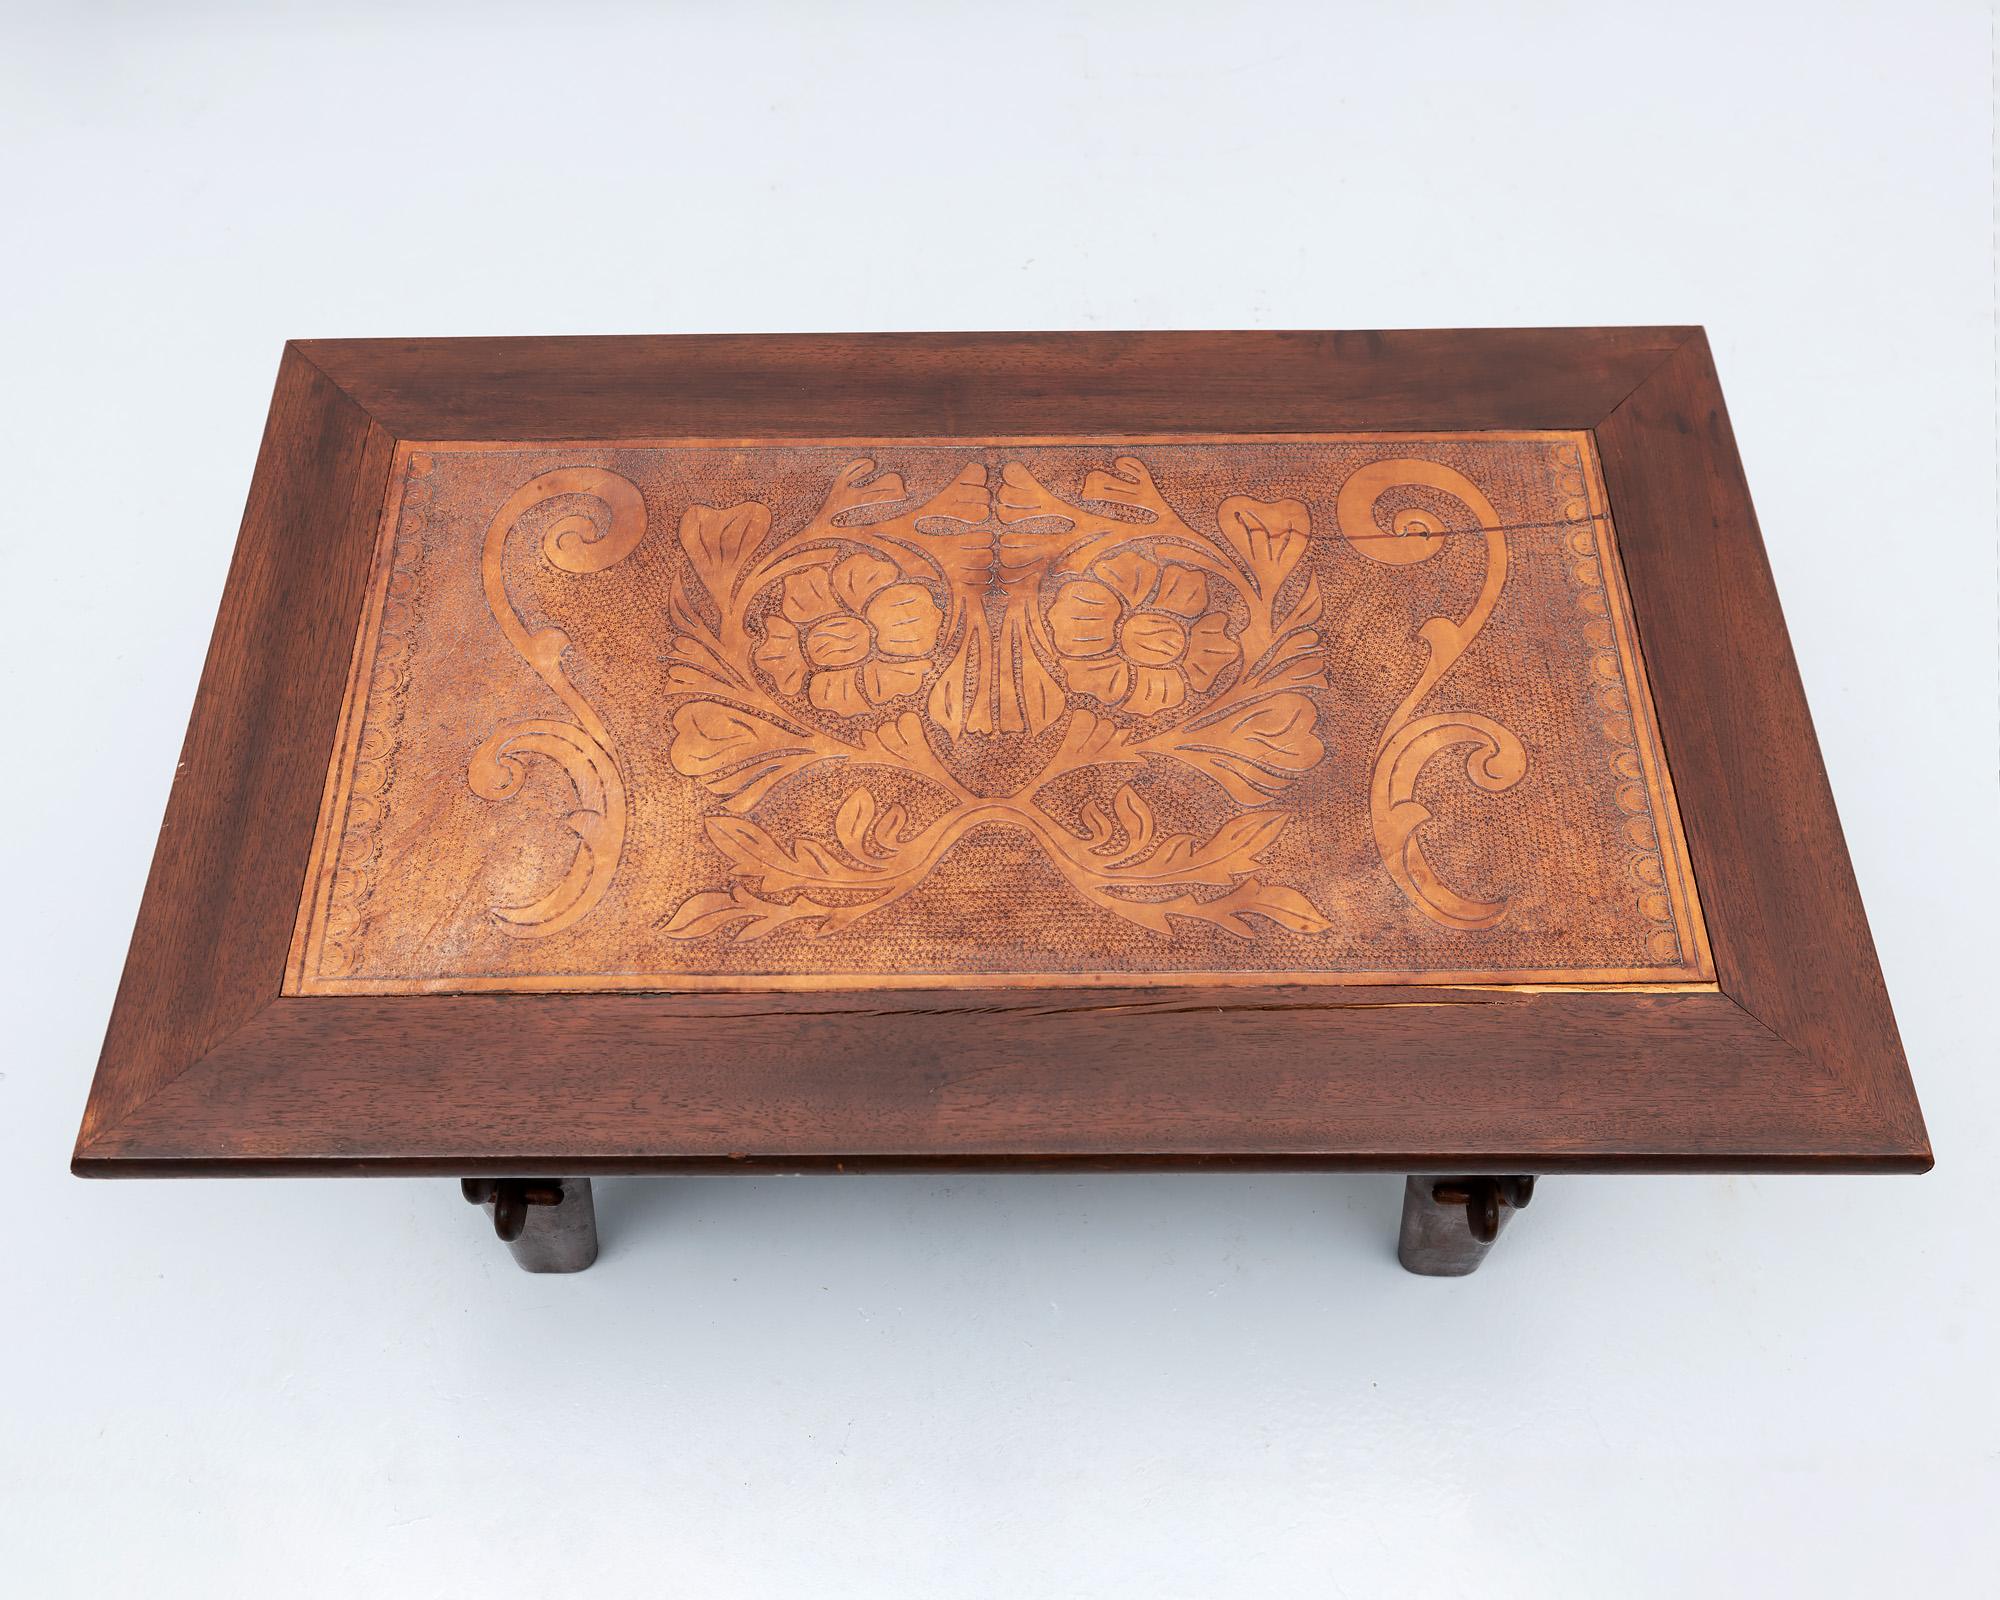 Lovely side table in rosewood and hand-tooled leather by Angel Pazmino for Muebles de Estillo, Ecuador, 1960s.